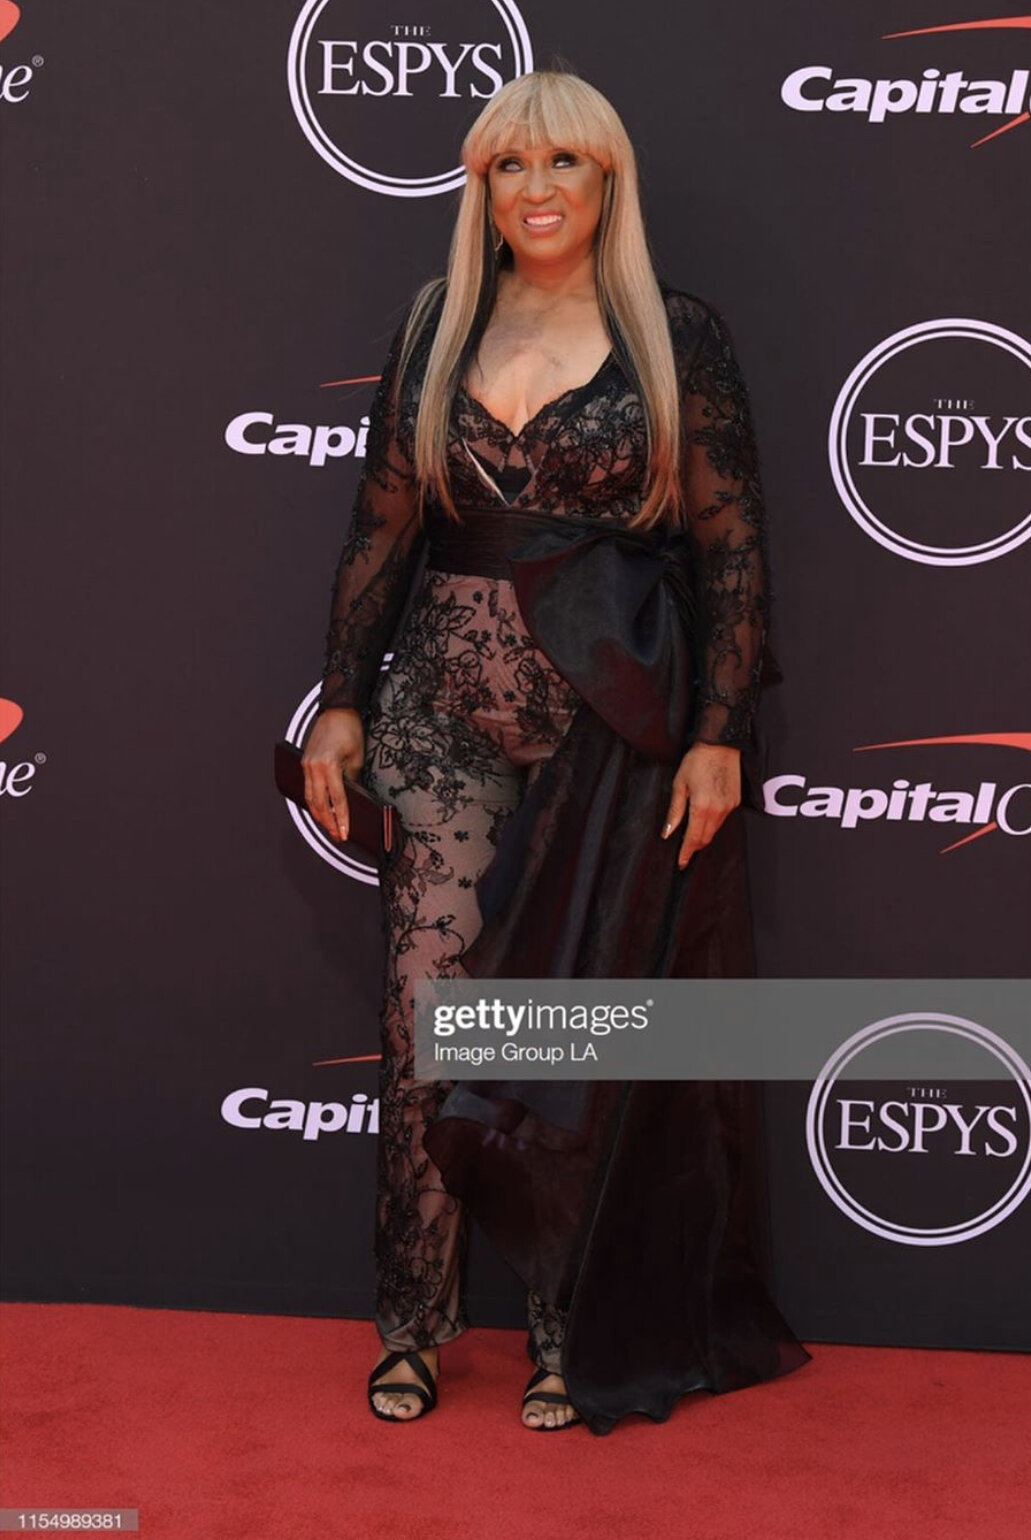  Sabrina Greenlee attends the 2019 ESPY Awards   styled by Vance Gamble  